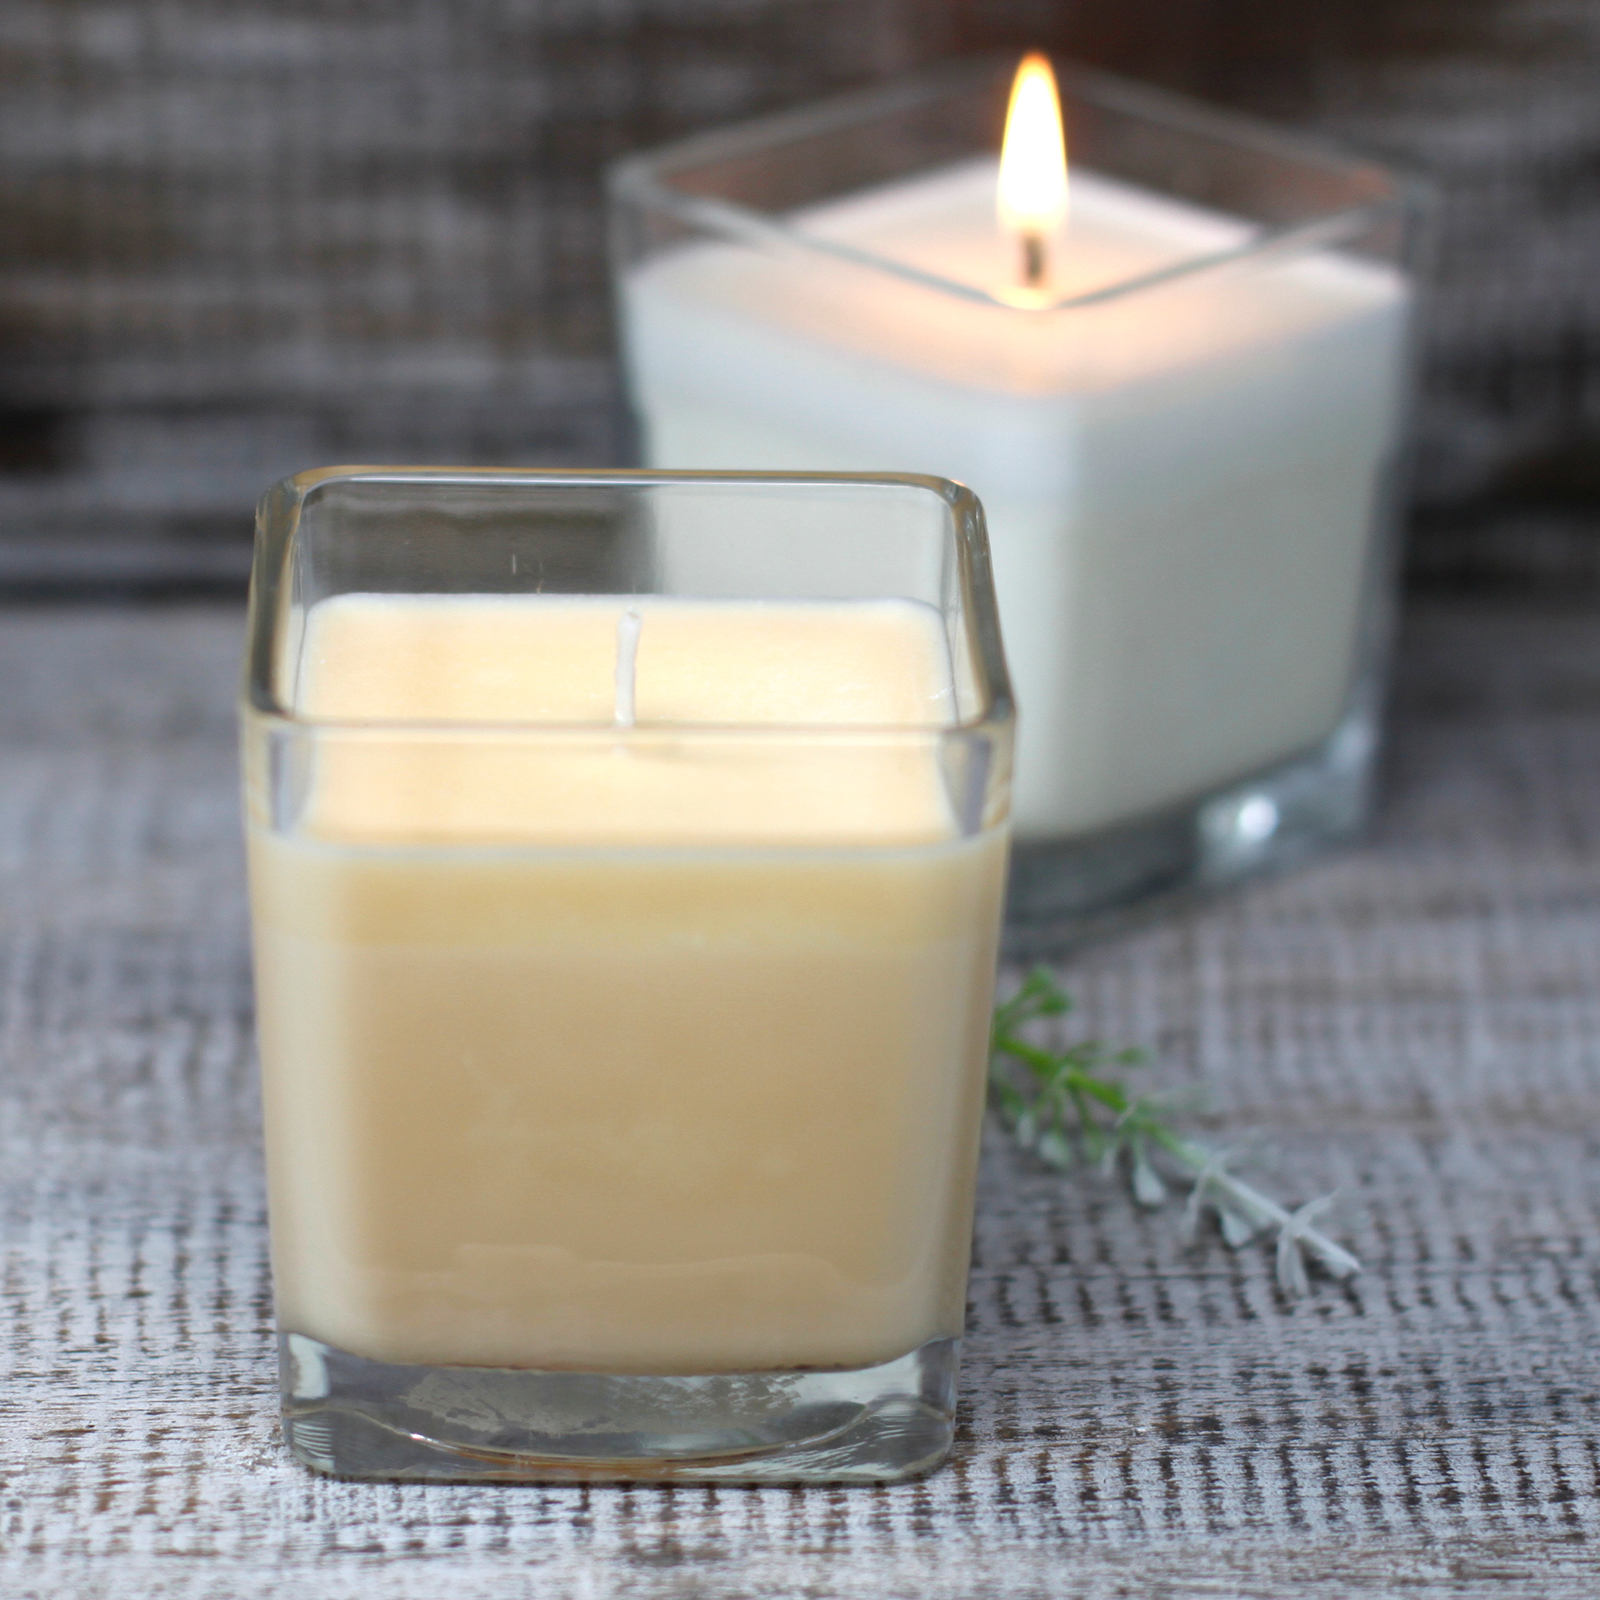 White Label Soy Wax Jar Candle - So Delicious